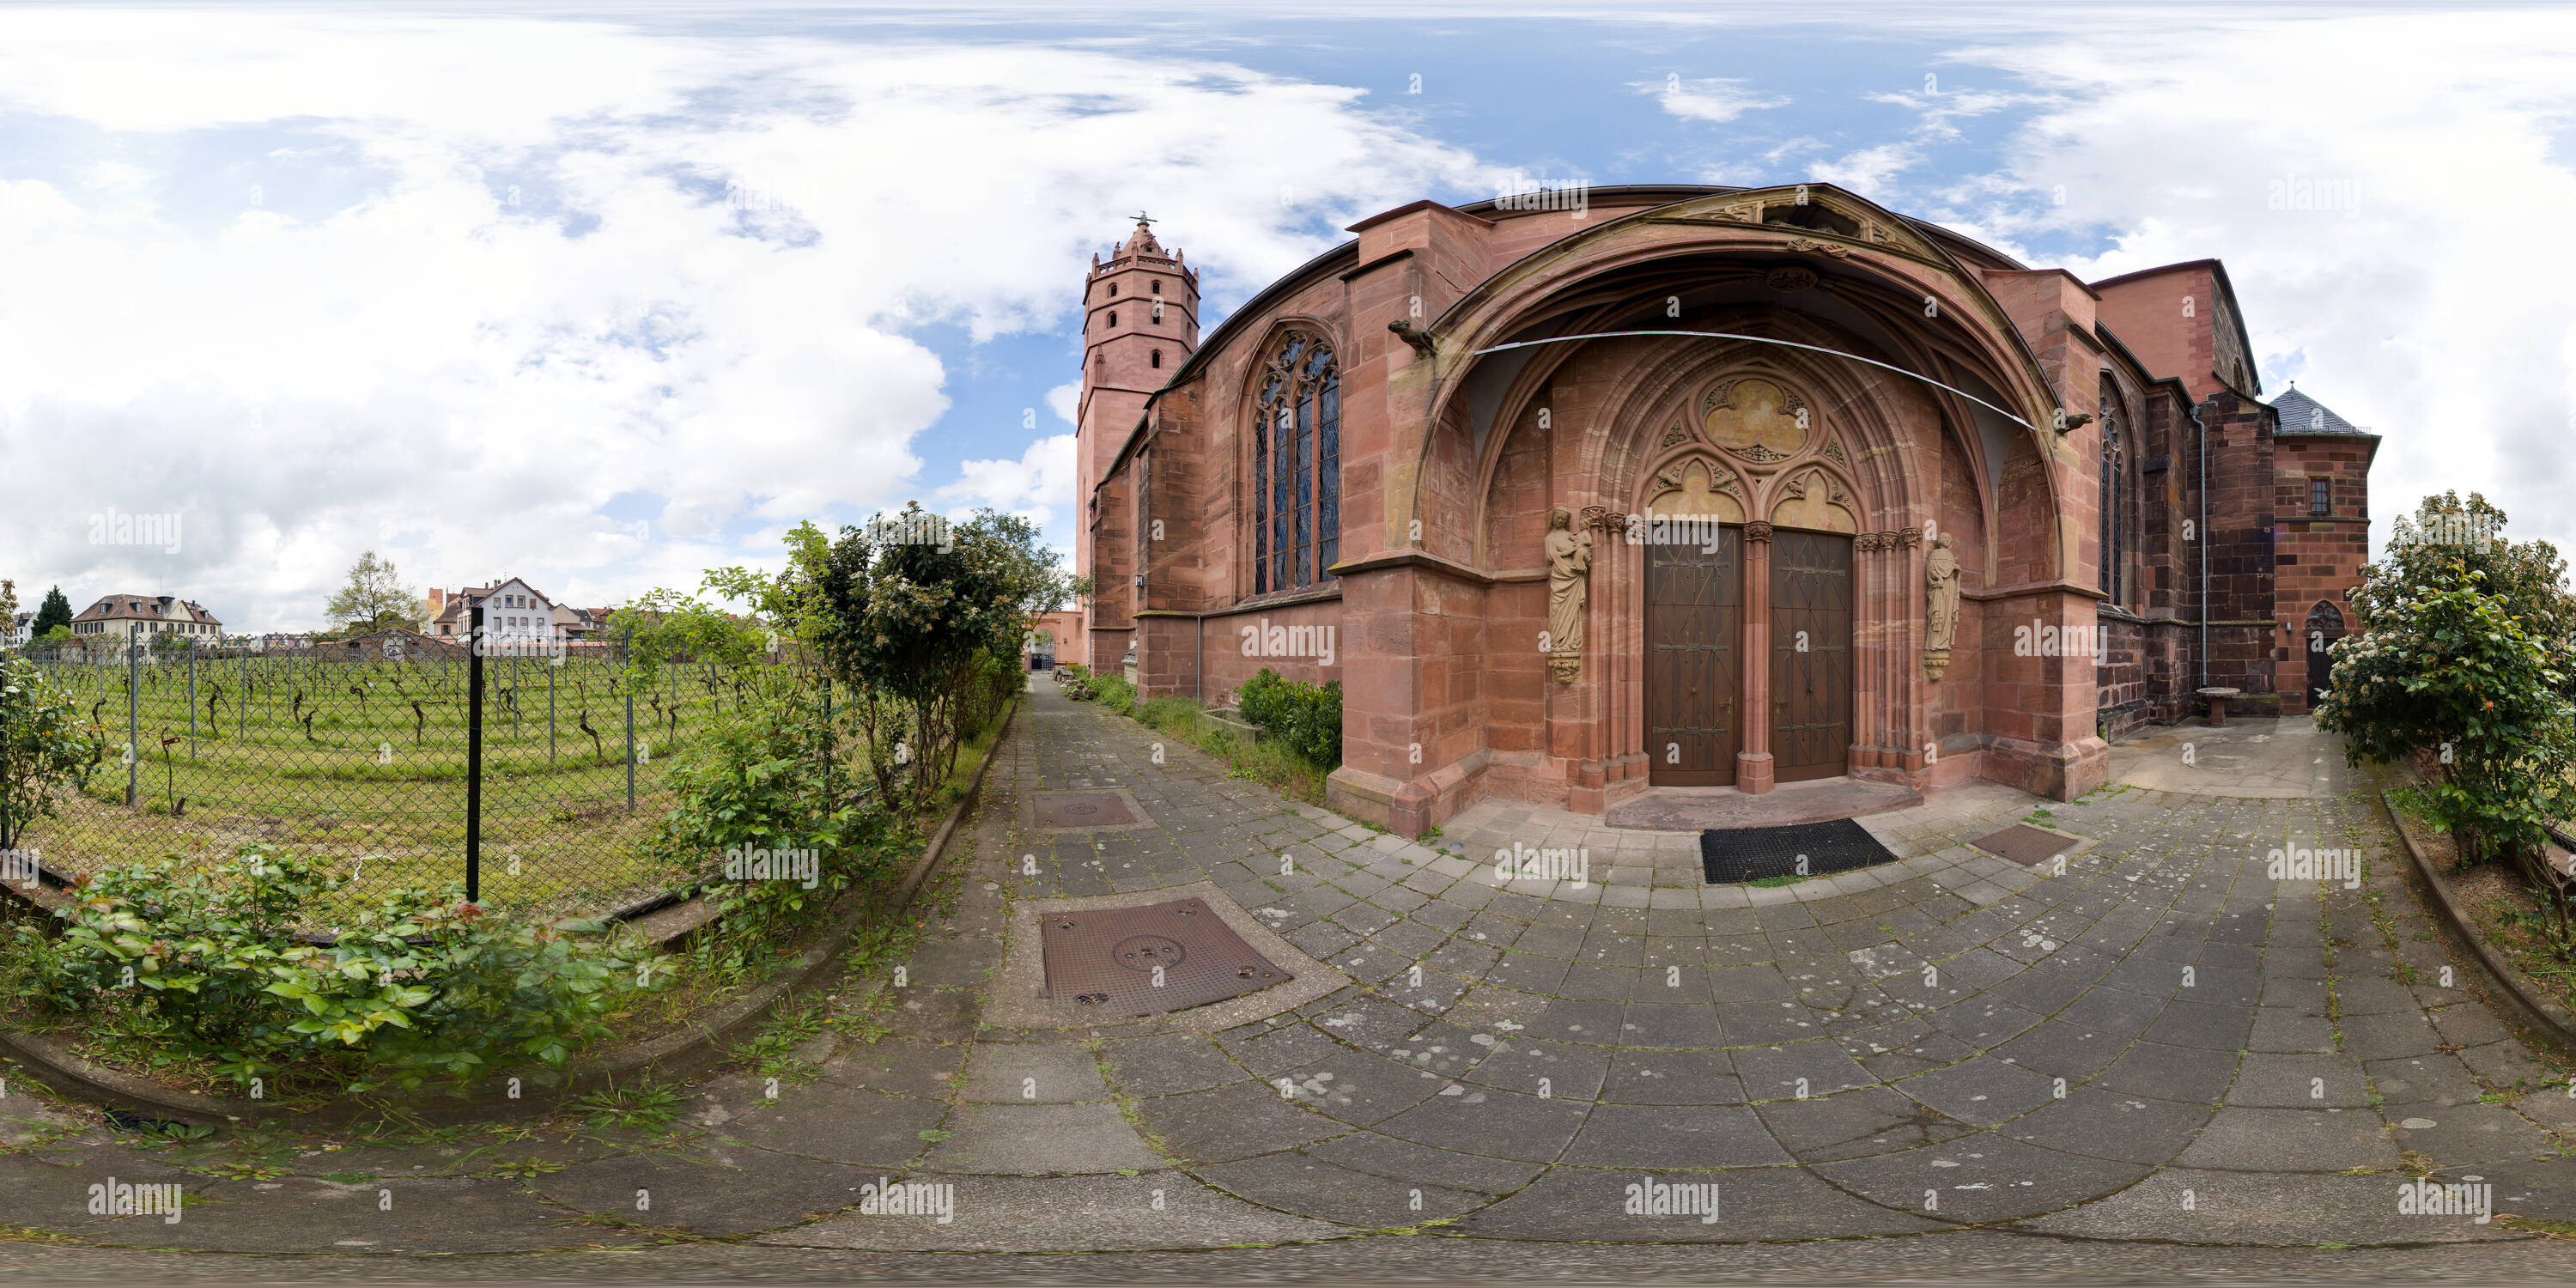 360 degree panoramic view of Liebfrauenkirche (Church of Our Dear Lady) Worms, Southern Entry, 2017-04